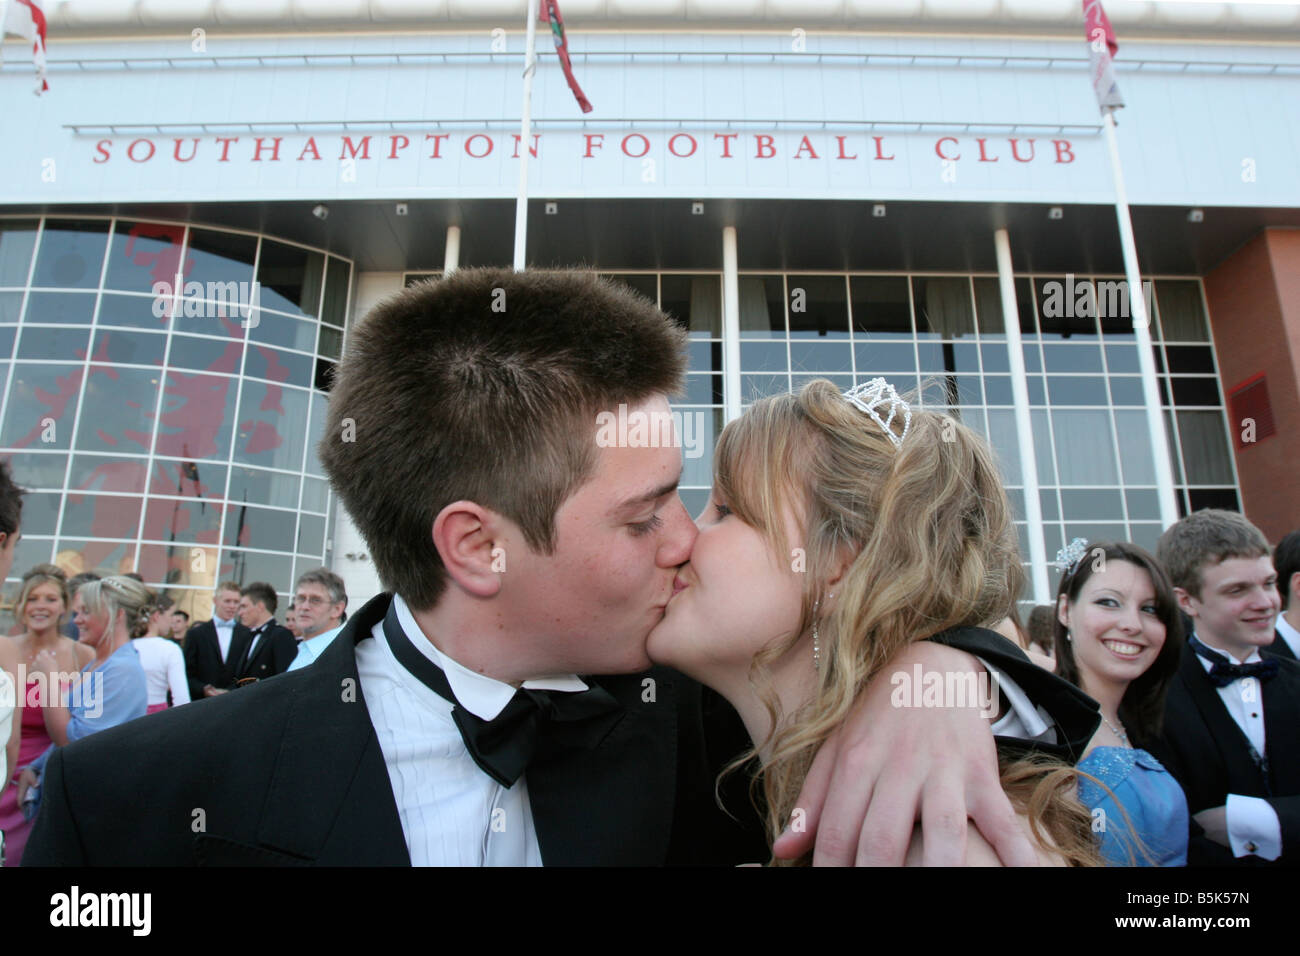 Teenagers at their School Prom at Southampton Football Club, England Stock Photo